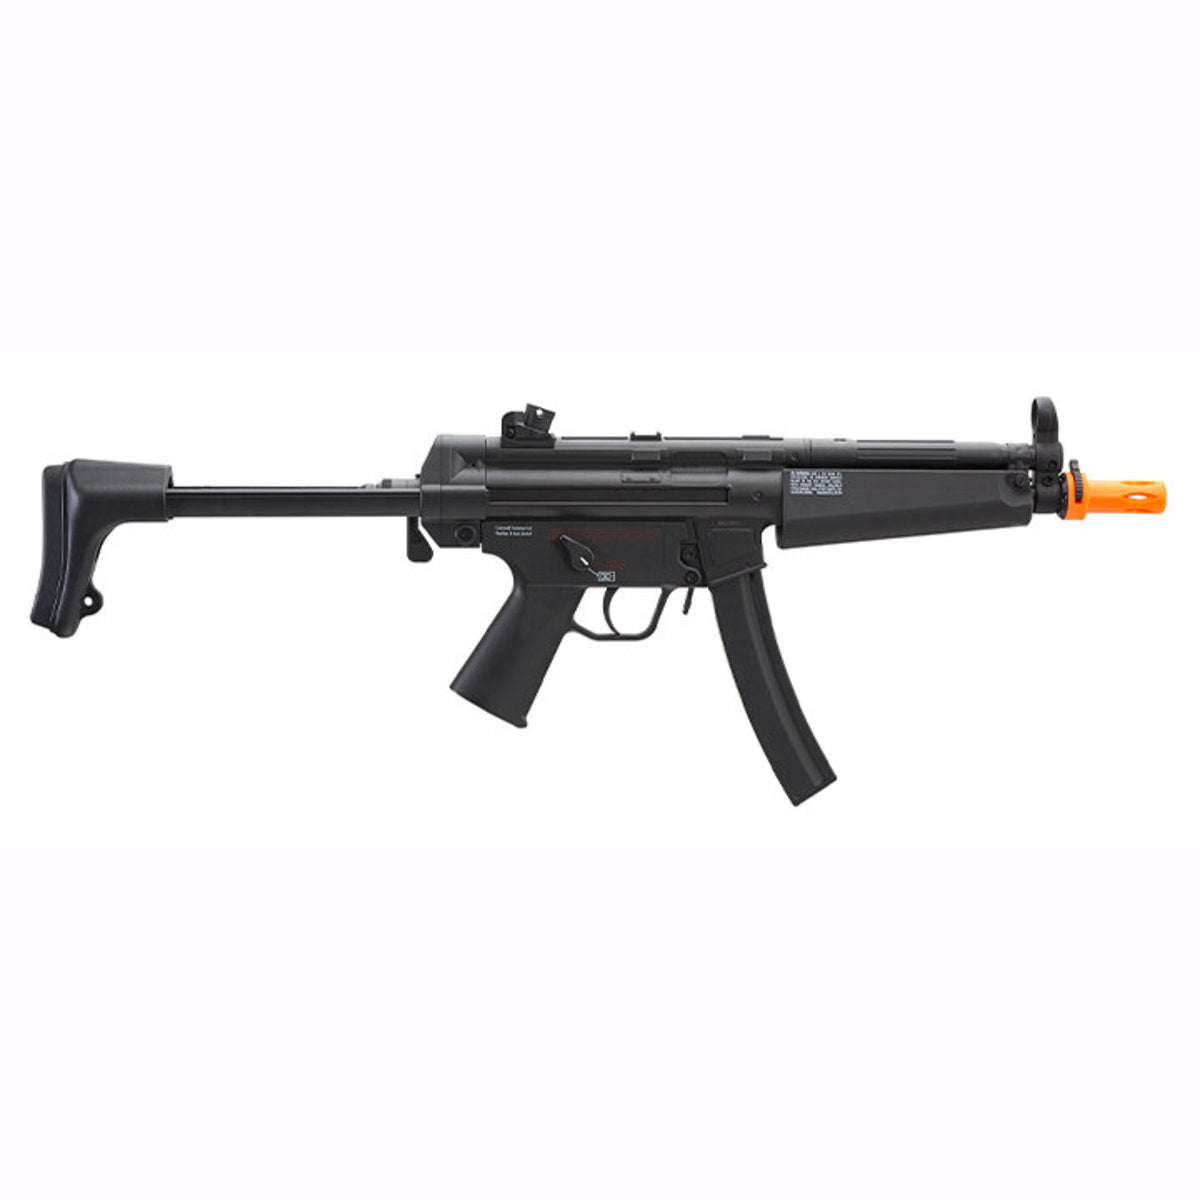 Umarex H&K Mp5 A4/A5 Smg Competition Series Aeg Rifle Kit